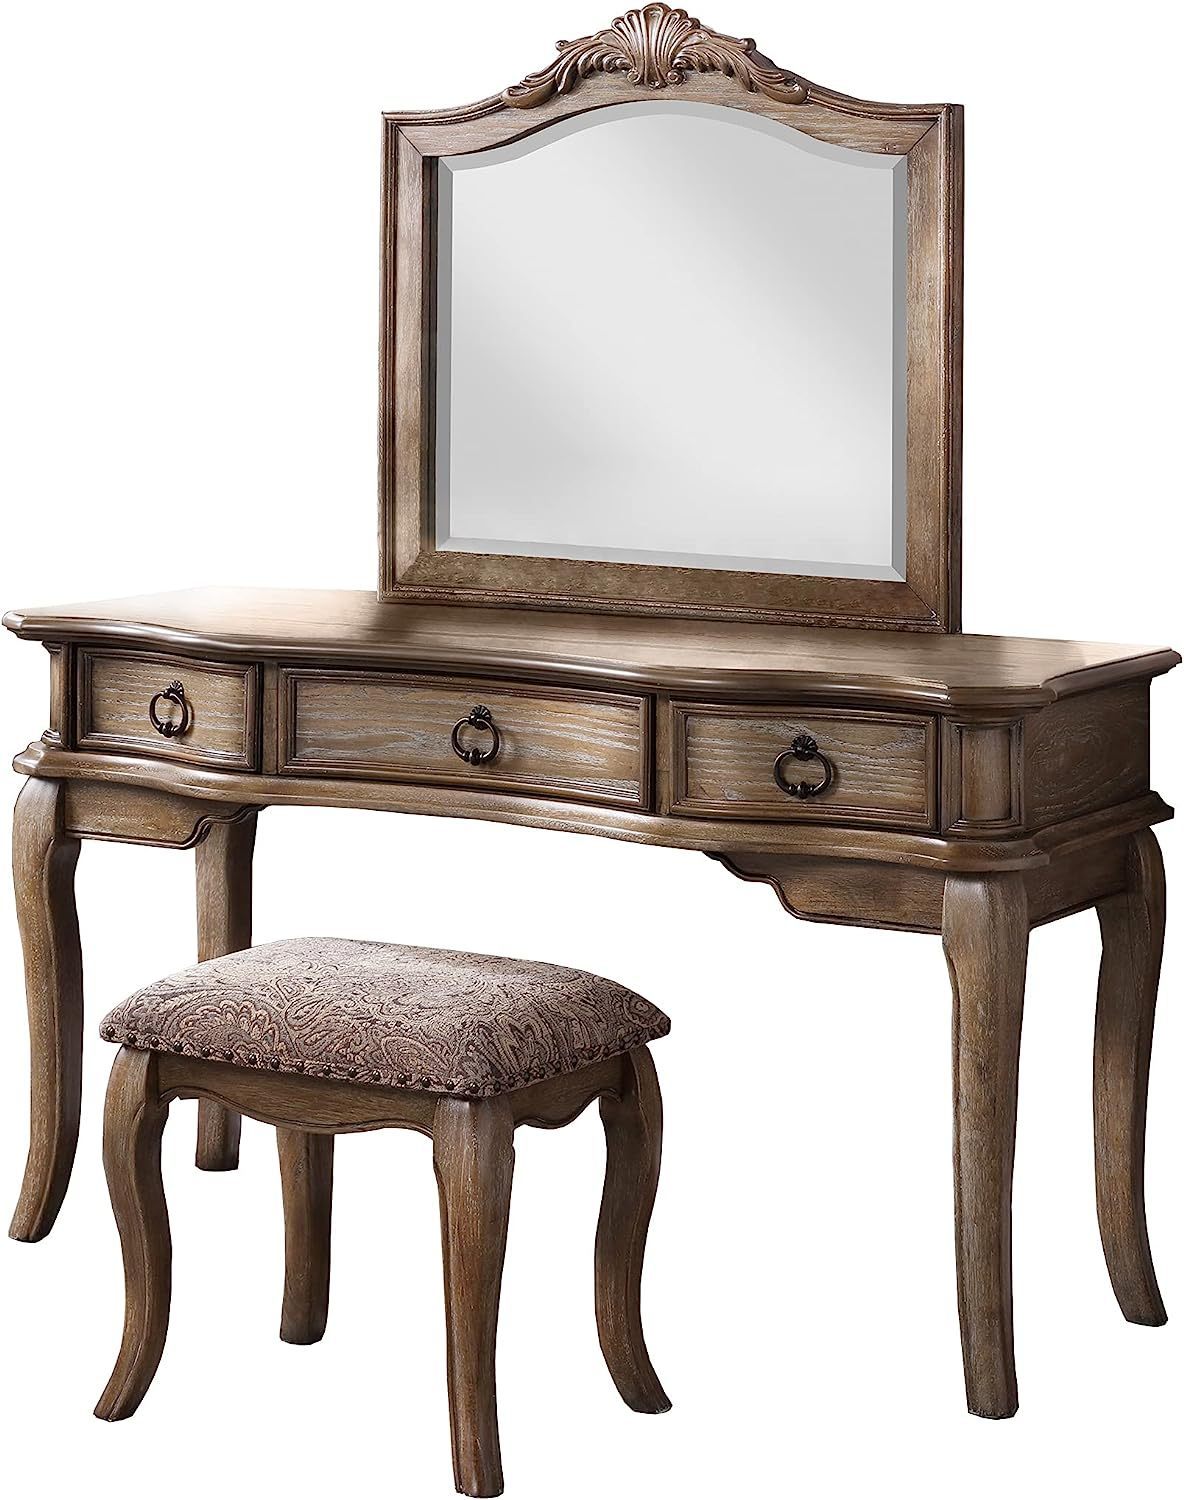 Contemporary Antique Oak Color Vanity Set with Stool Retro Style Drawers Cabriole-tapered Legs Mirror with Floral Crown Molding